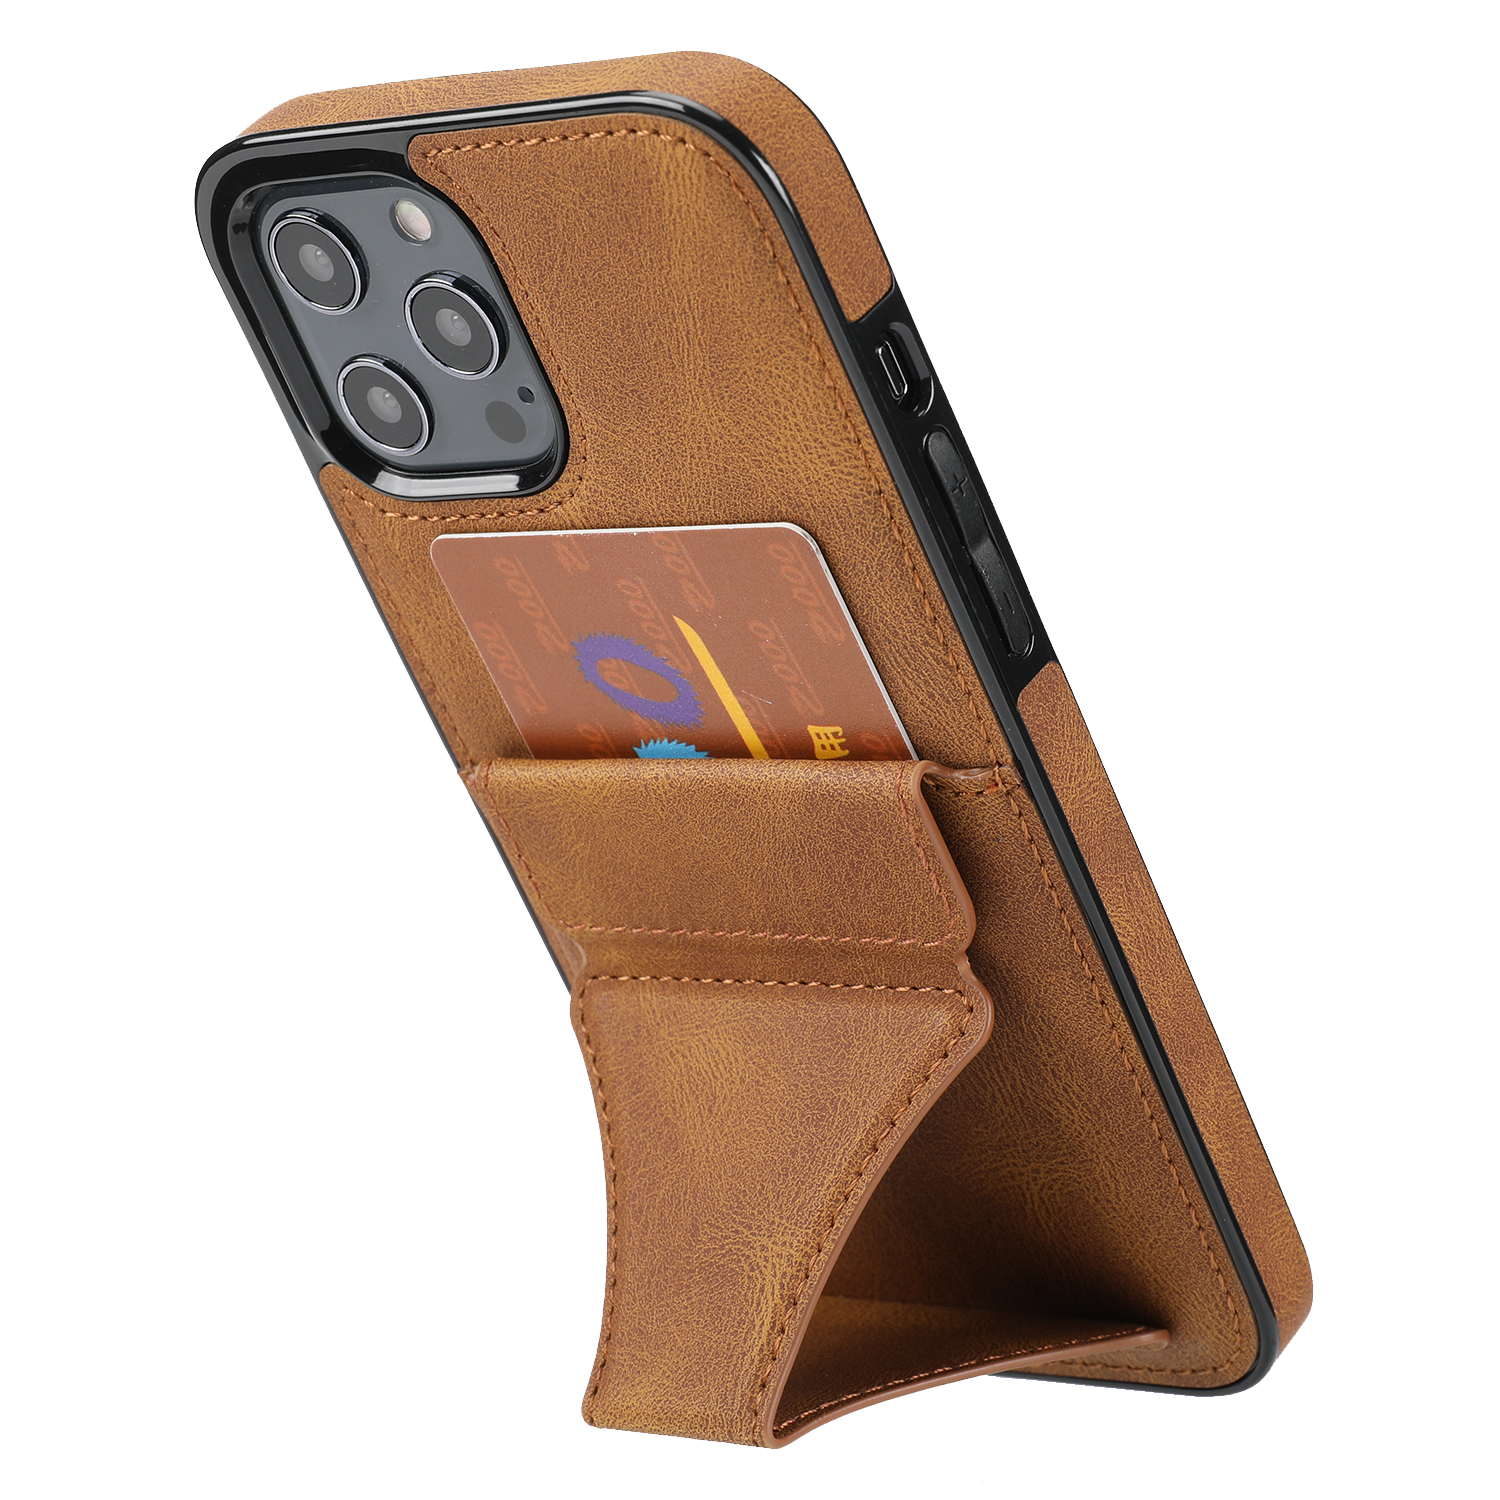 Mobile  Phone  Protective  Cover Solid Color Full Protector Anti-shock Anti-scratch Anti-slip Anti-fouling Phone Shell Compatible For Iphone 11 12 13 Series Brown_Iphone 11 pro max